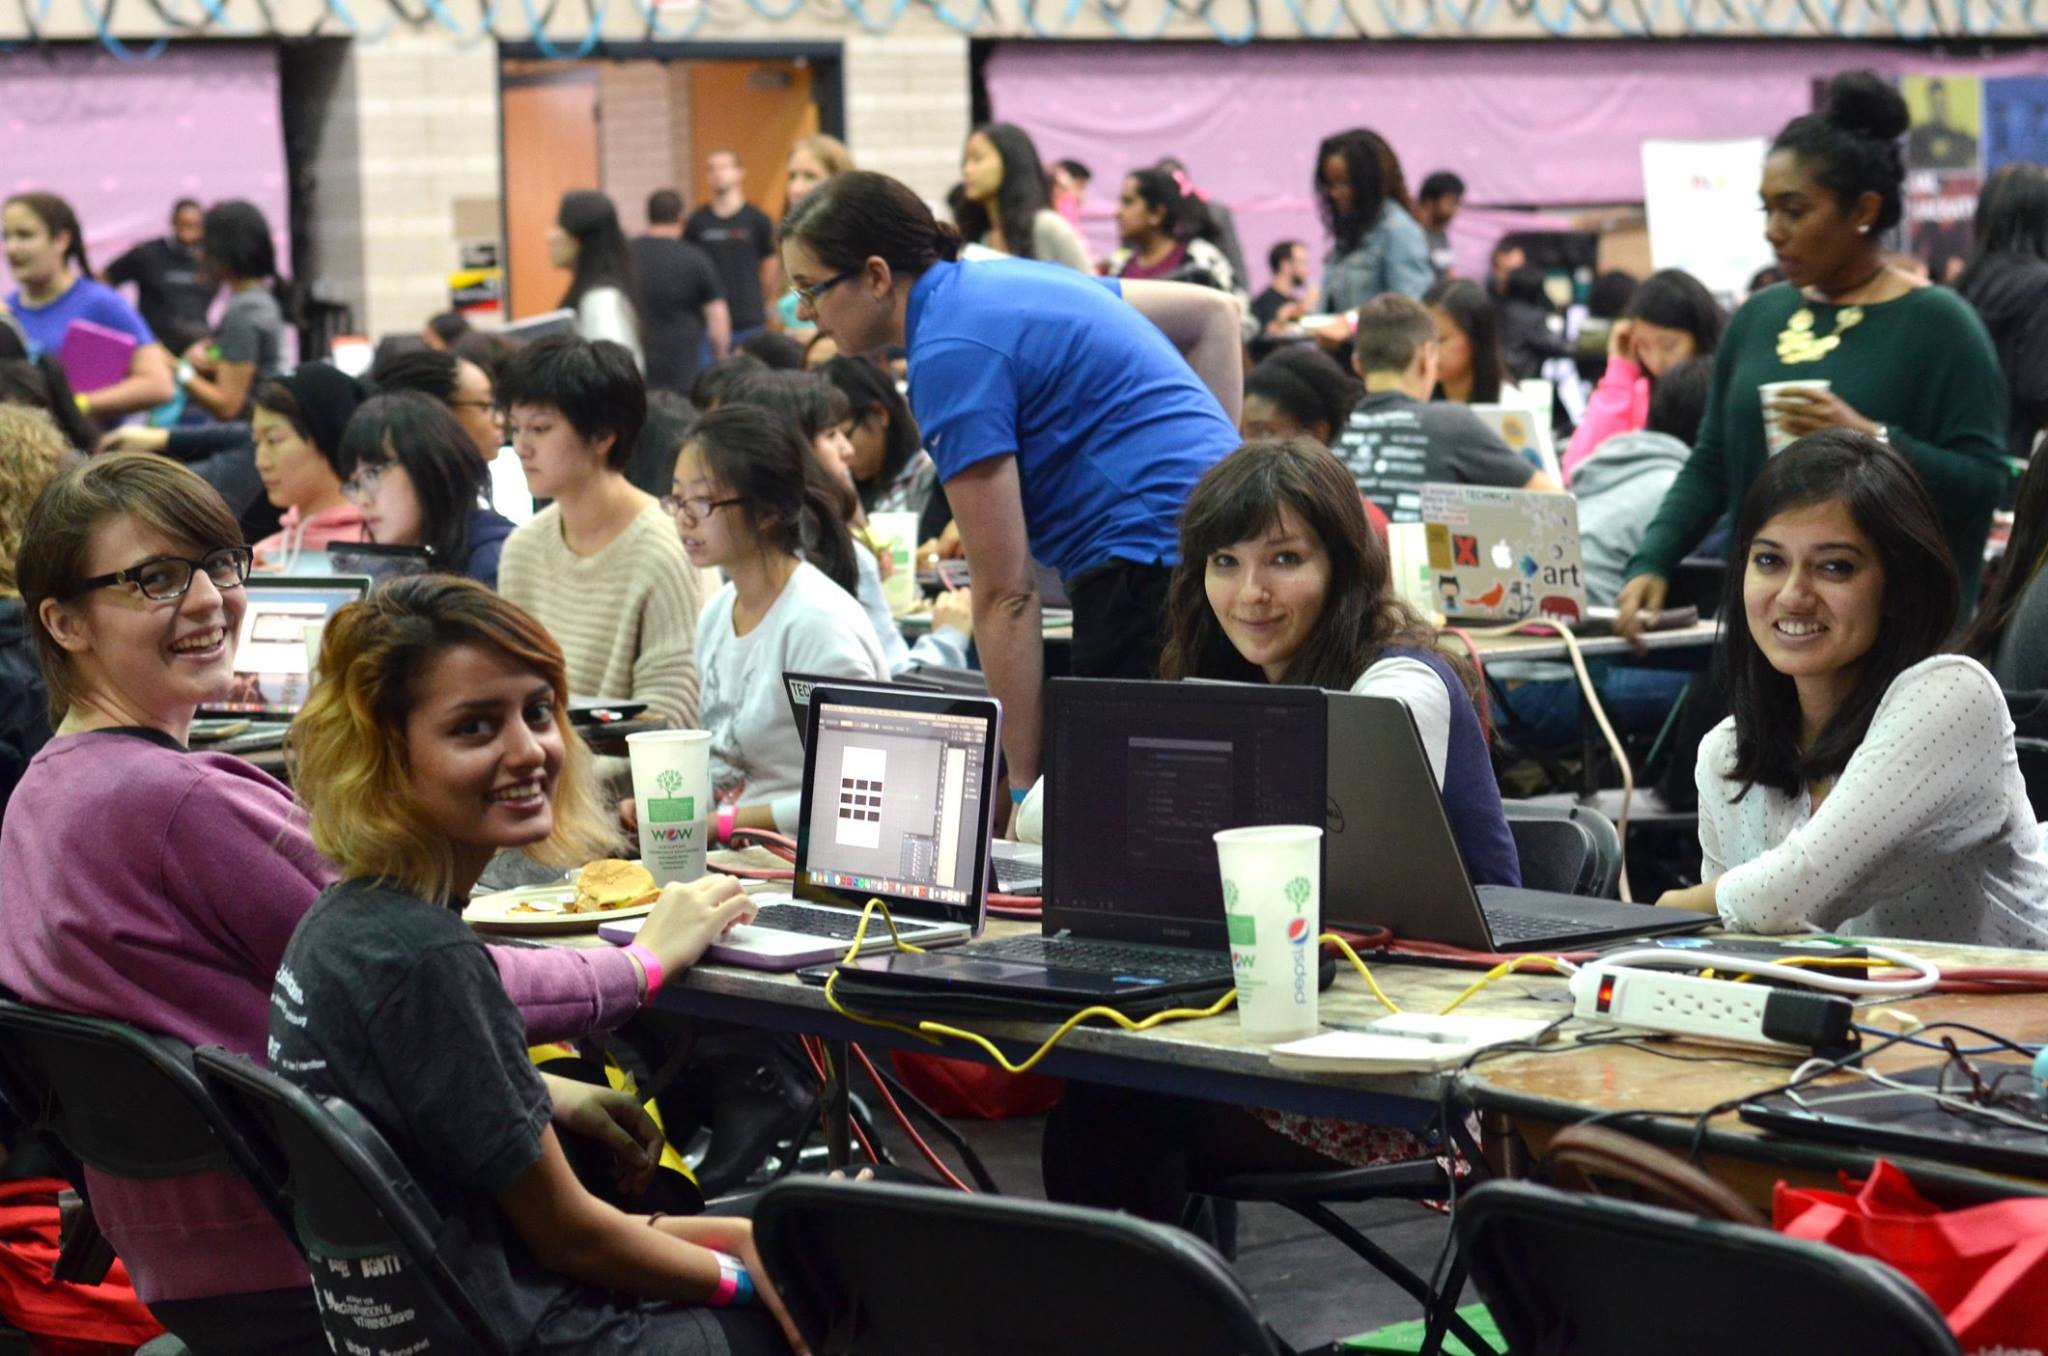 In 2016, Technica became the world’s biggest female hackathon.